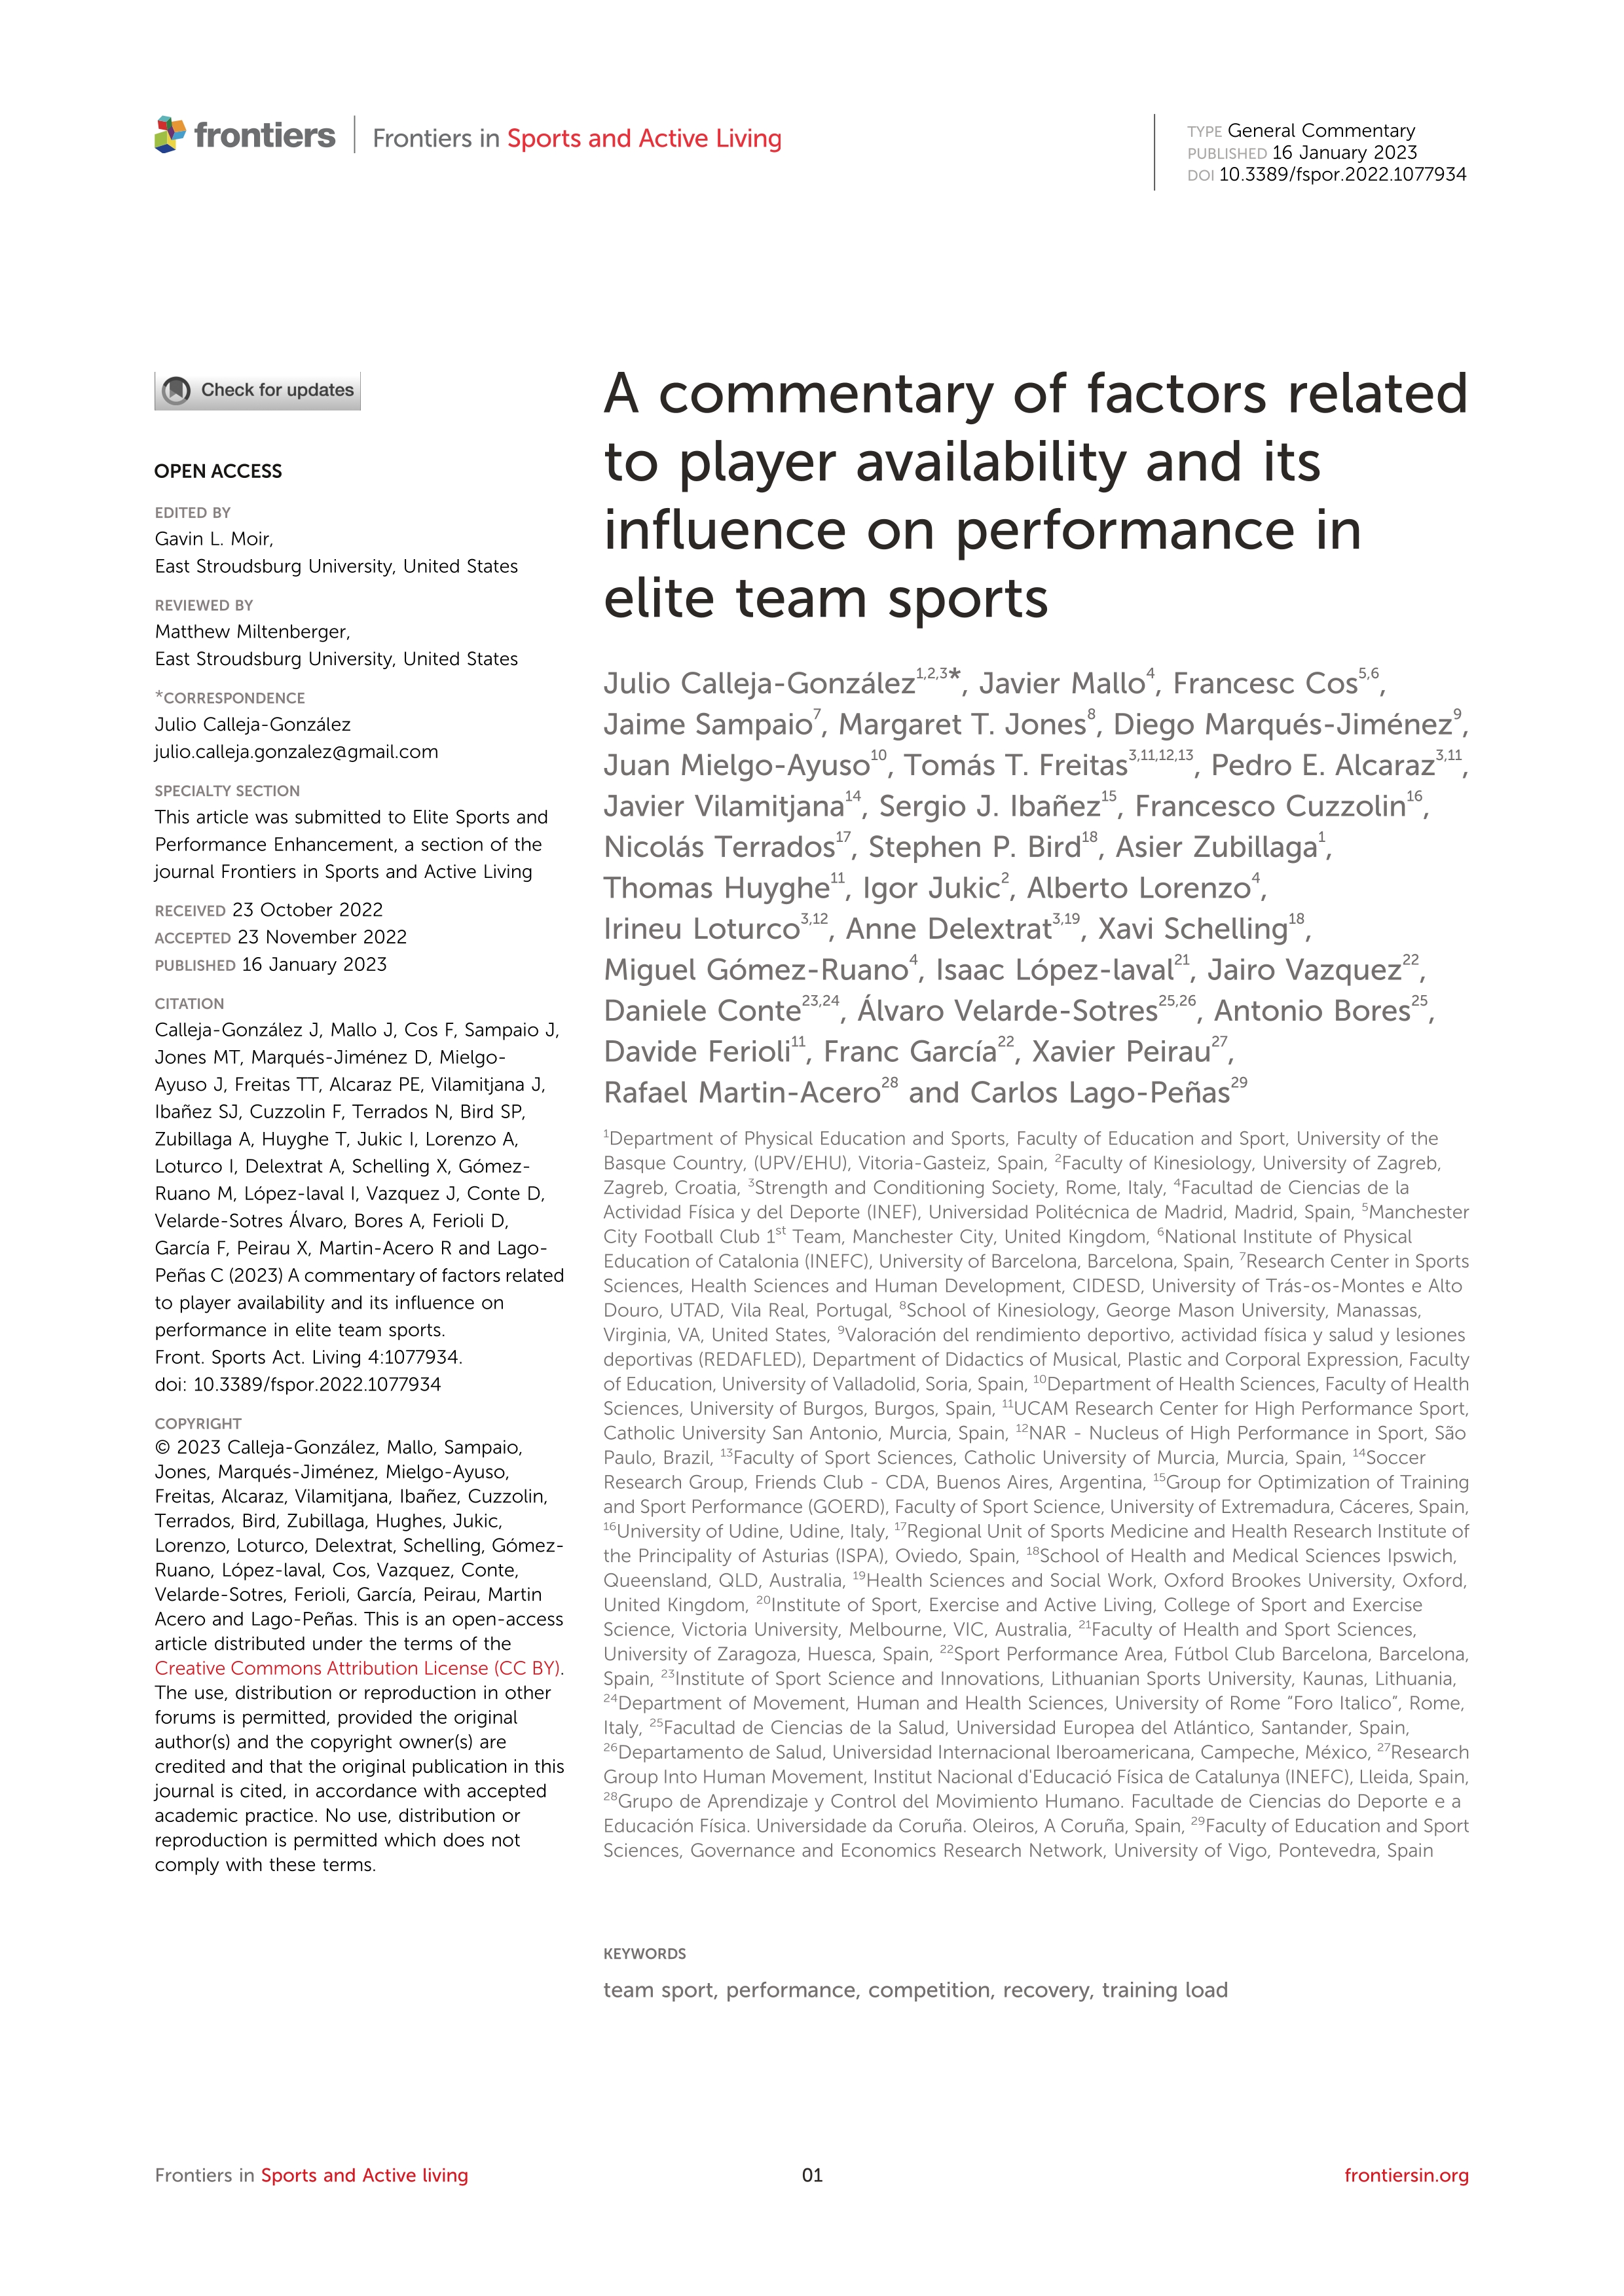 A commentary of factors related to player availability and its influence on performance in elite team sports